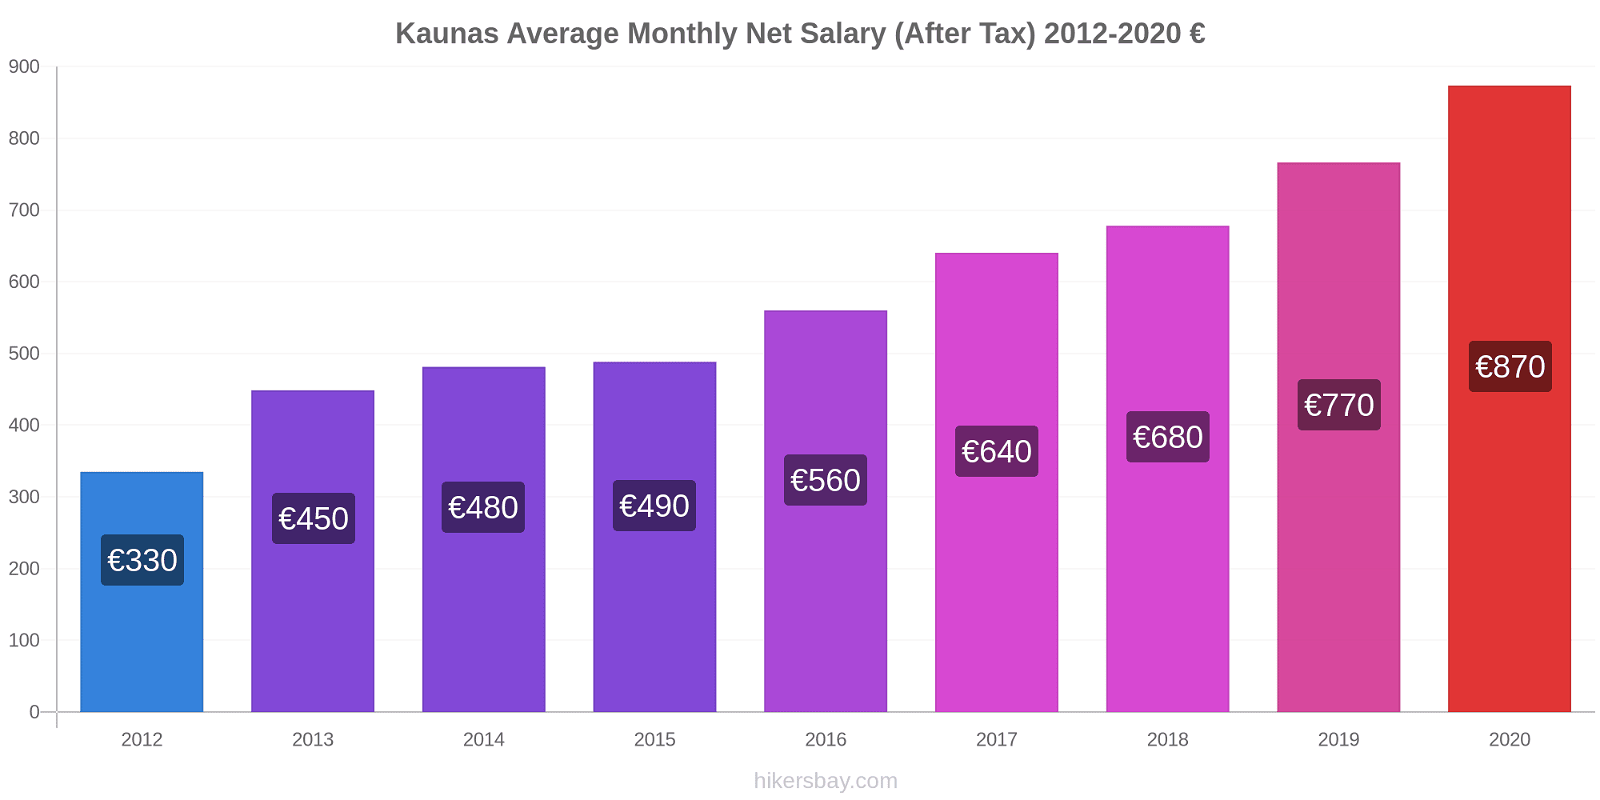 Kaunas price changes Average Monthly Net Salary (After Tax) hikersbay.com